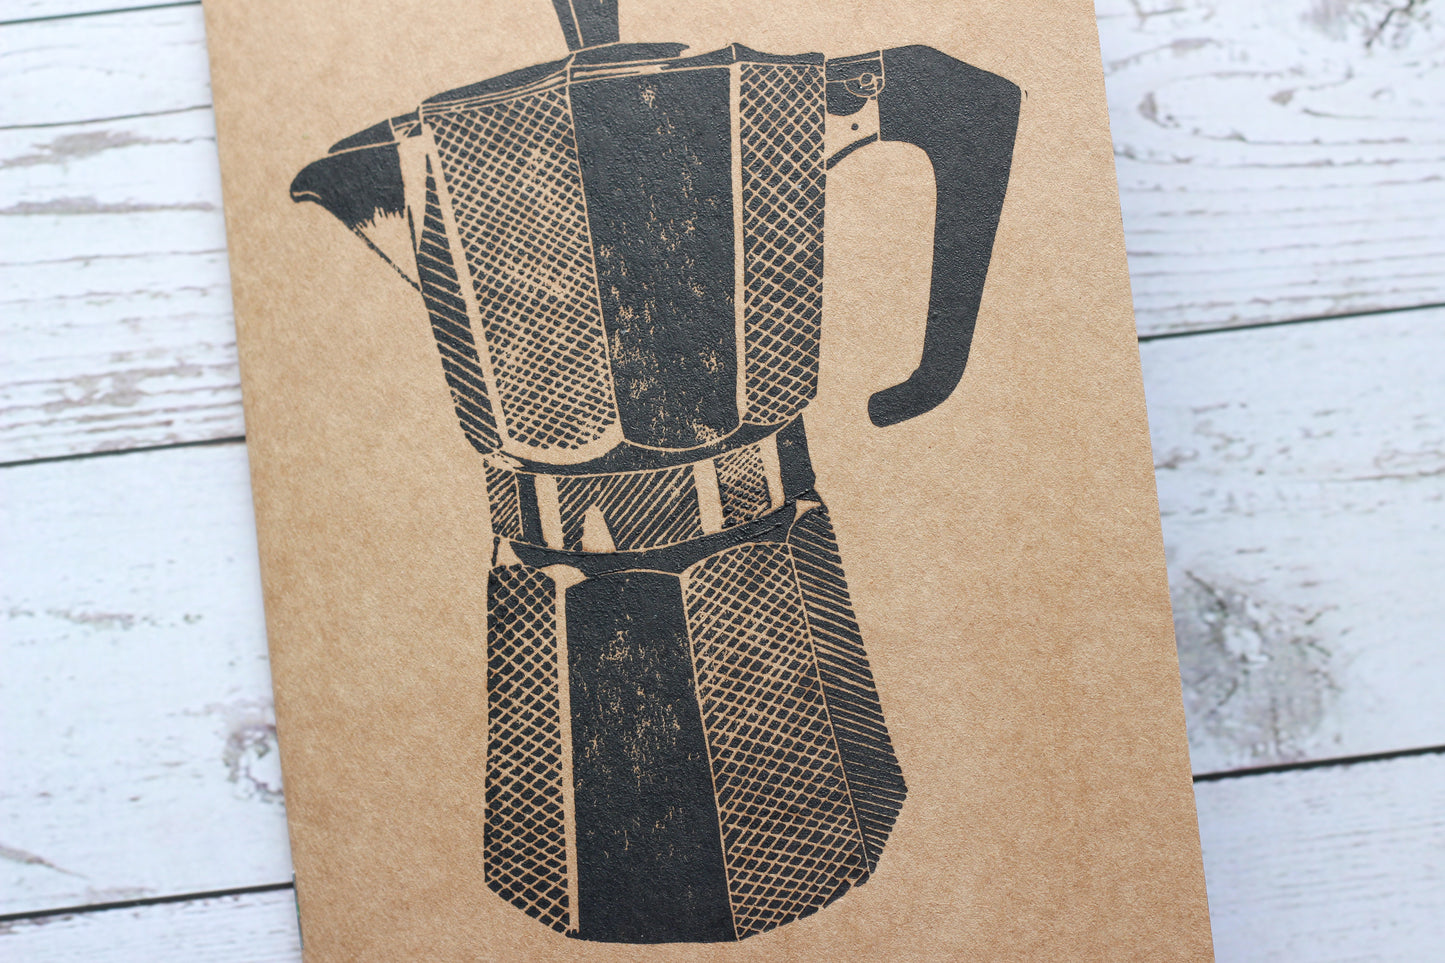 A lino printed sketchbook with a print of a coffee moka pot on the front